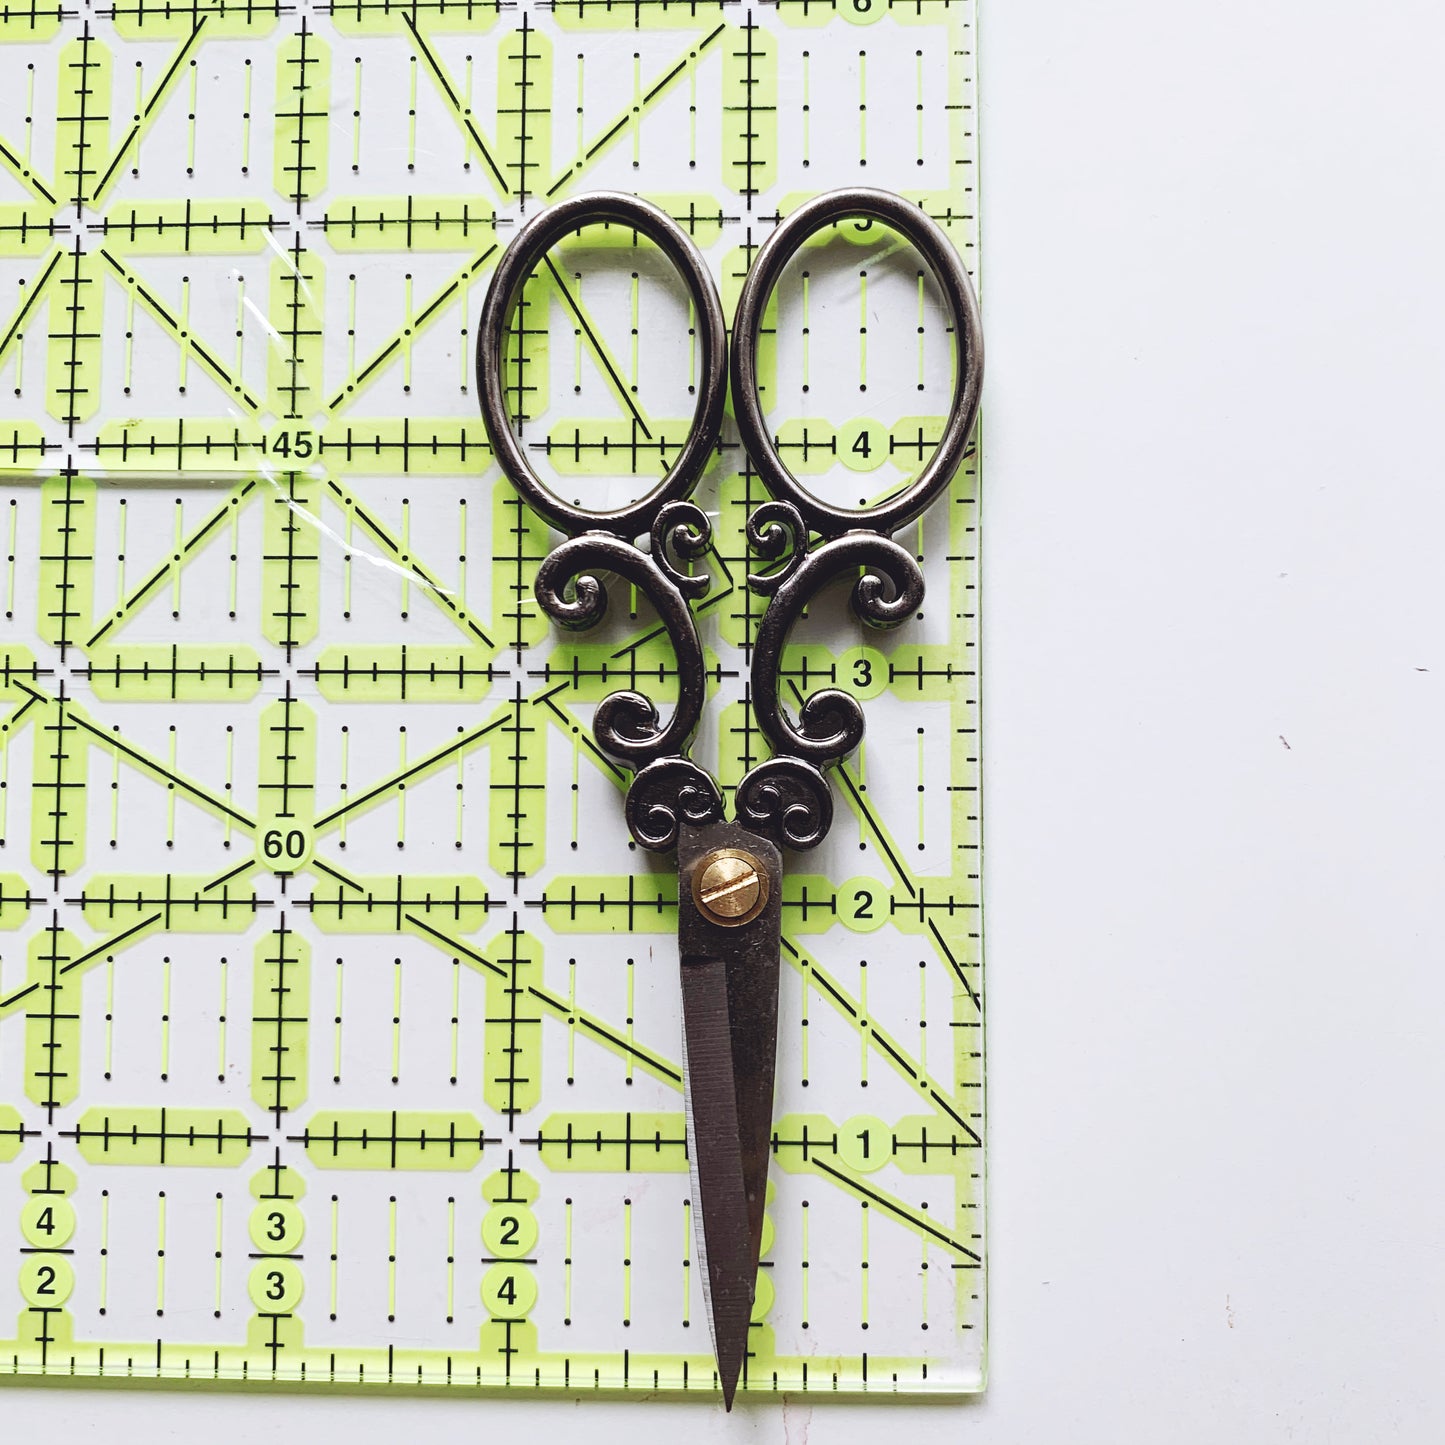 Dark Silver Vieira Scalloped Antique Style Stainless Steel Embroidery Scissors